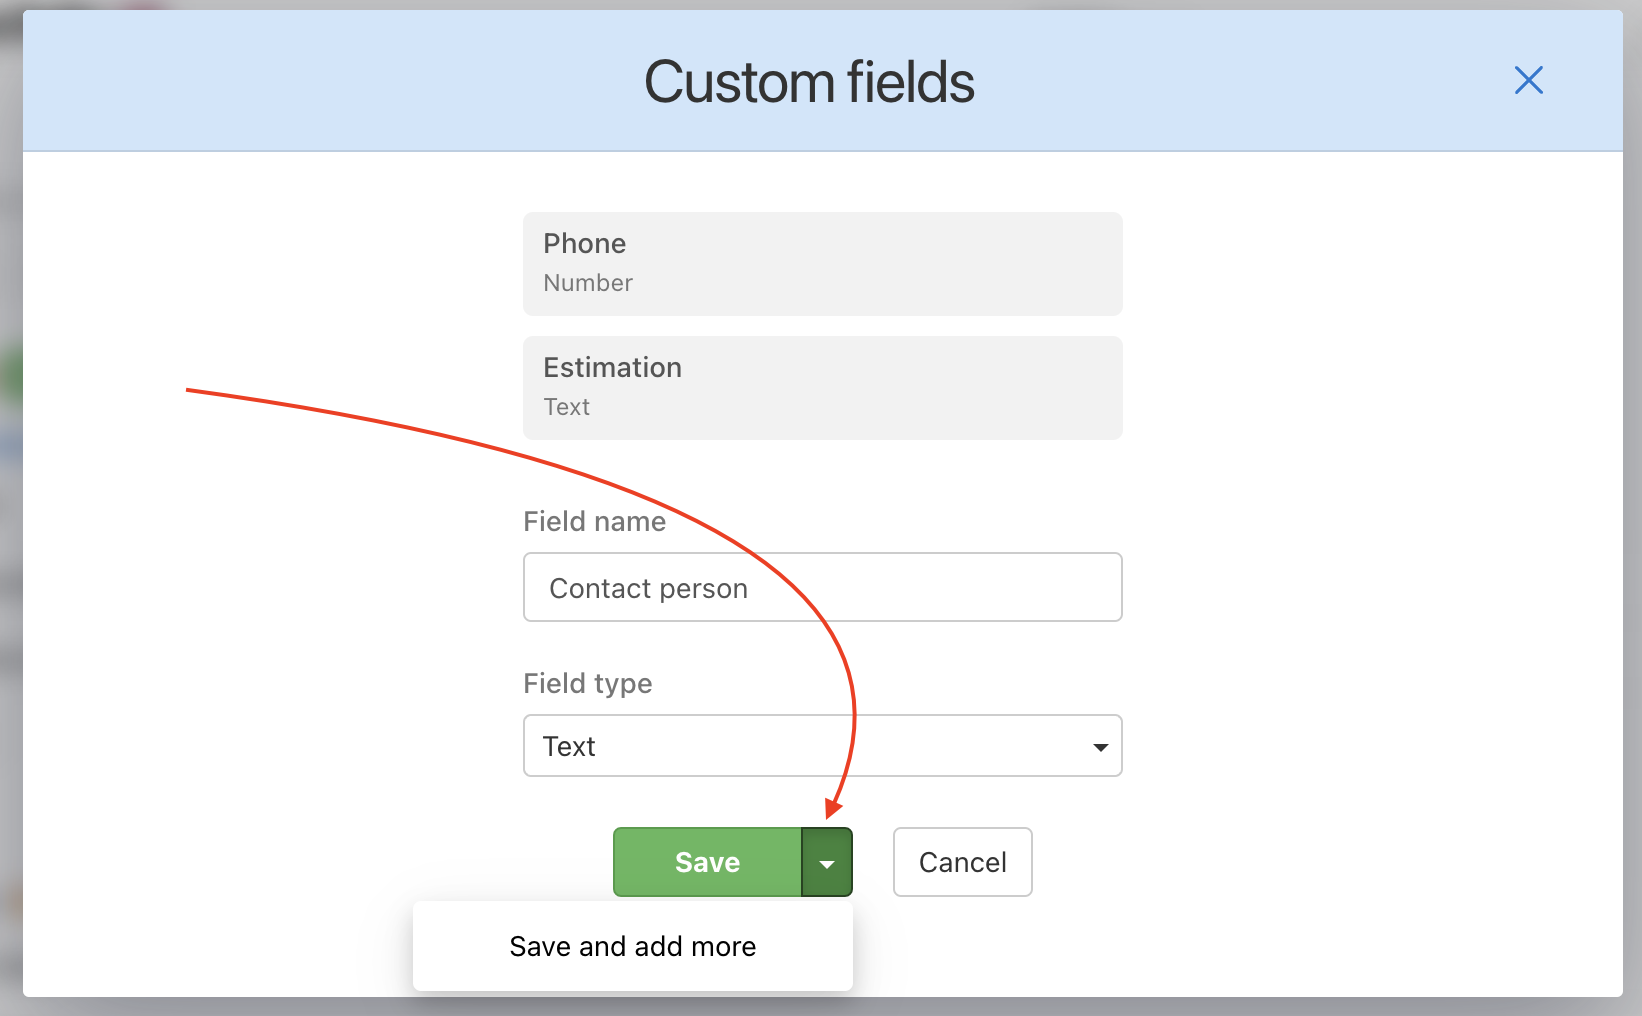 This is how you add more custom fields.